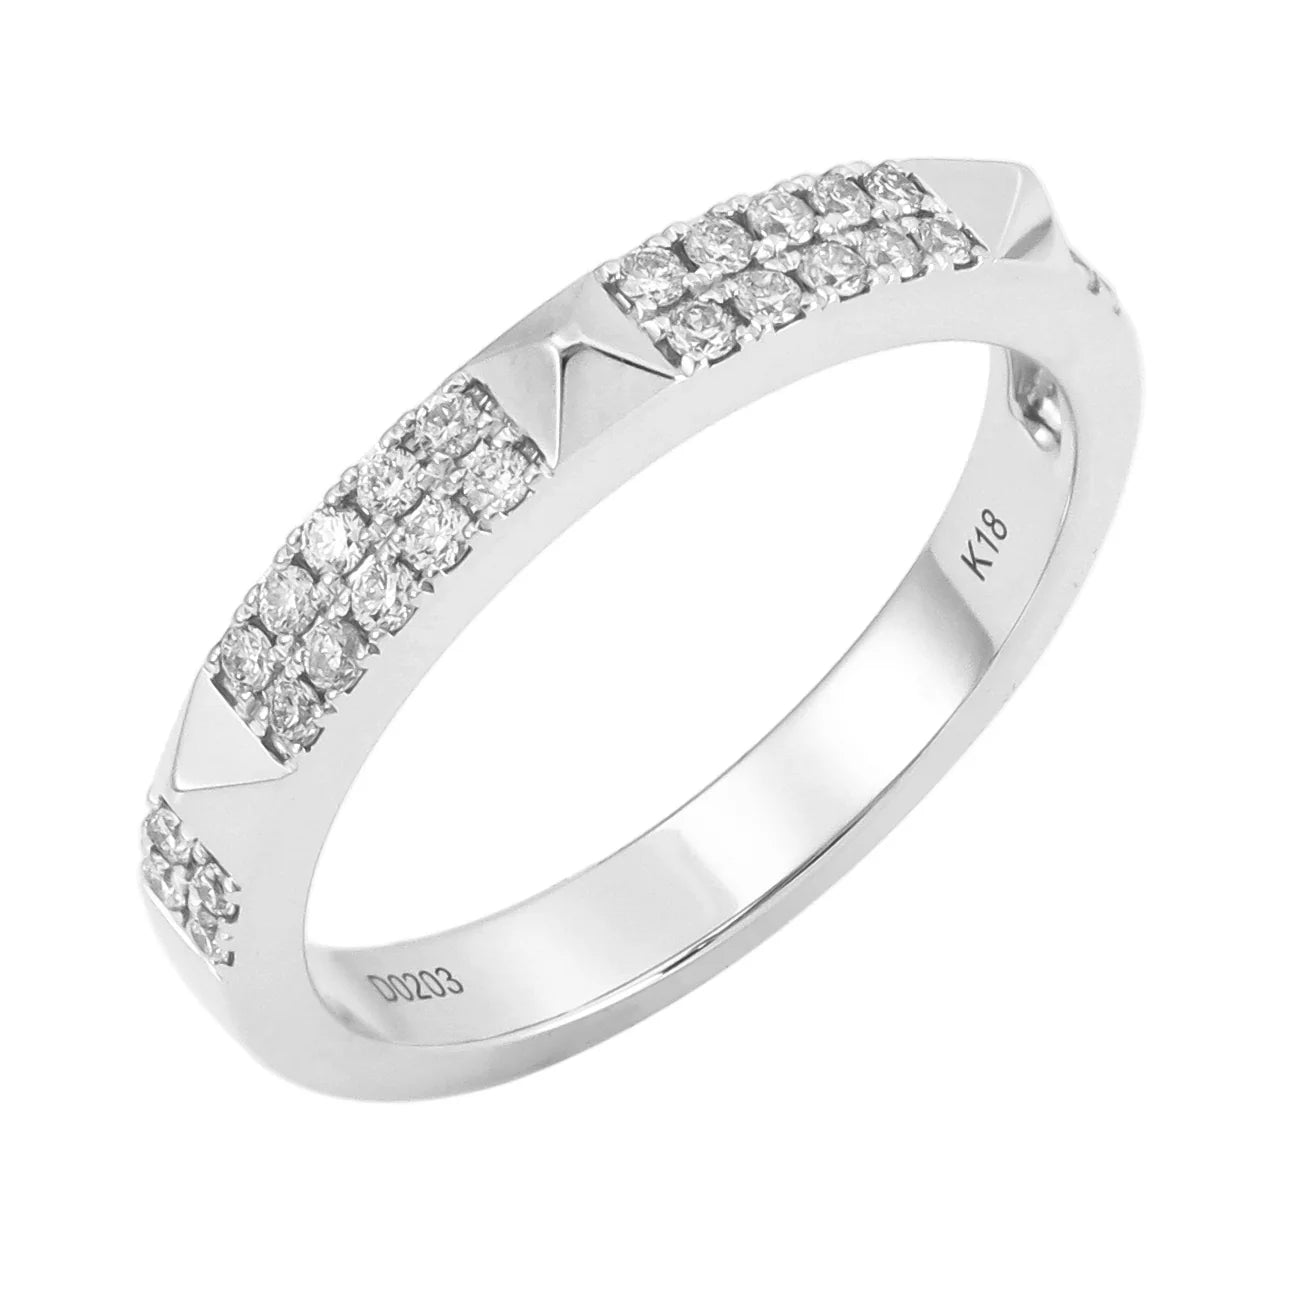 White Gold & Diamond Studded Stackable Ring